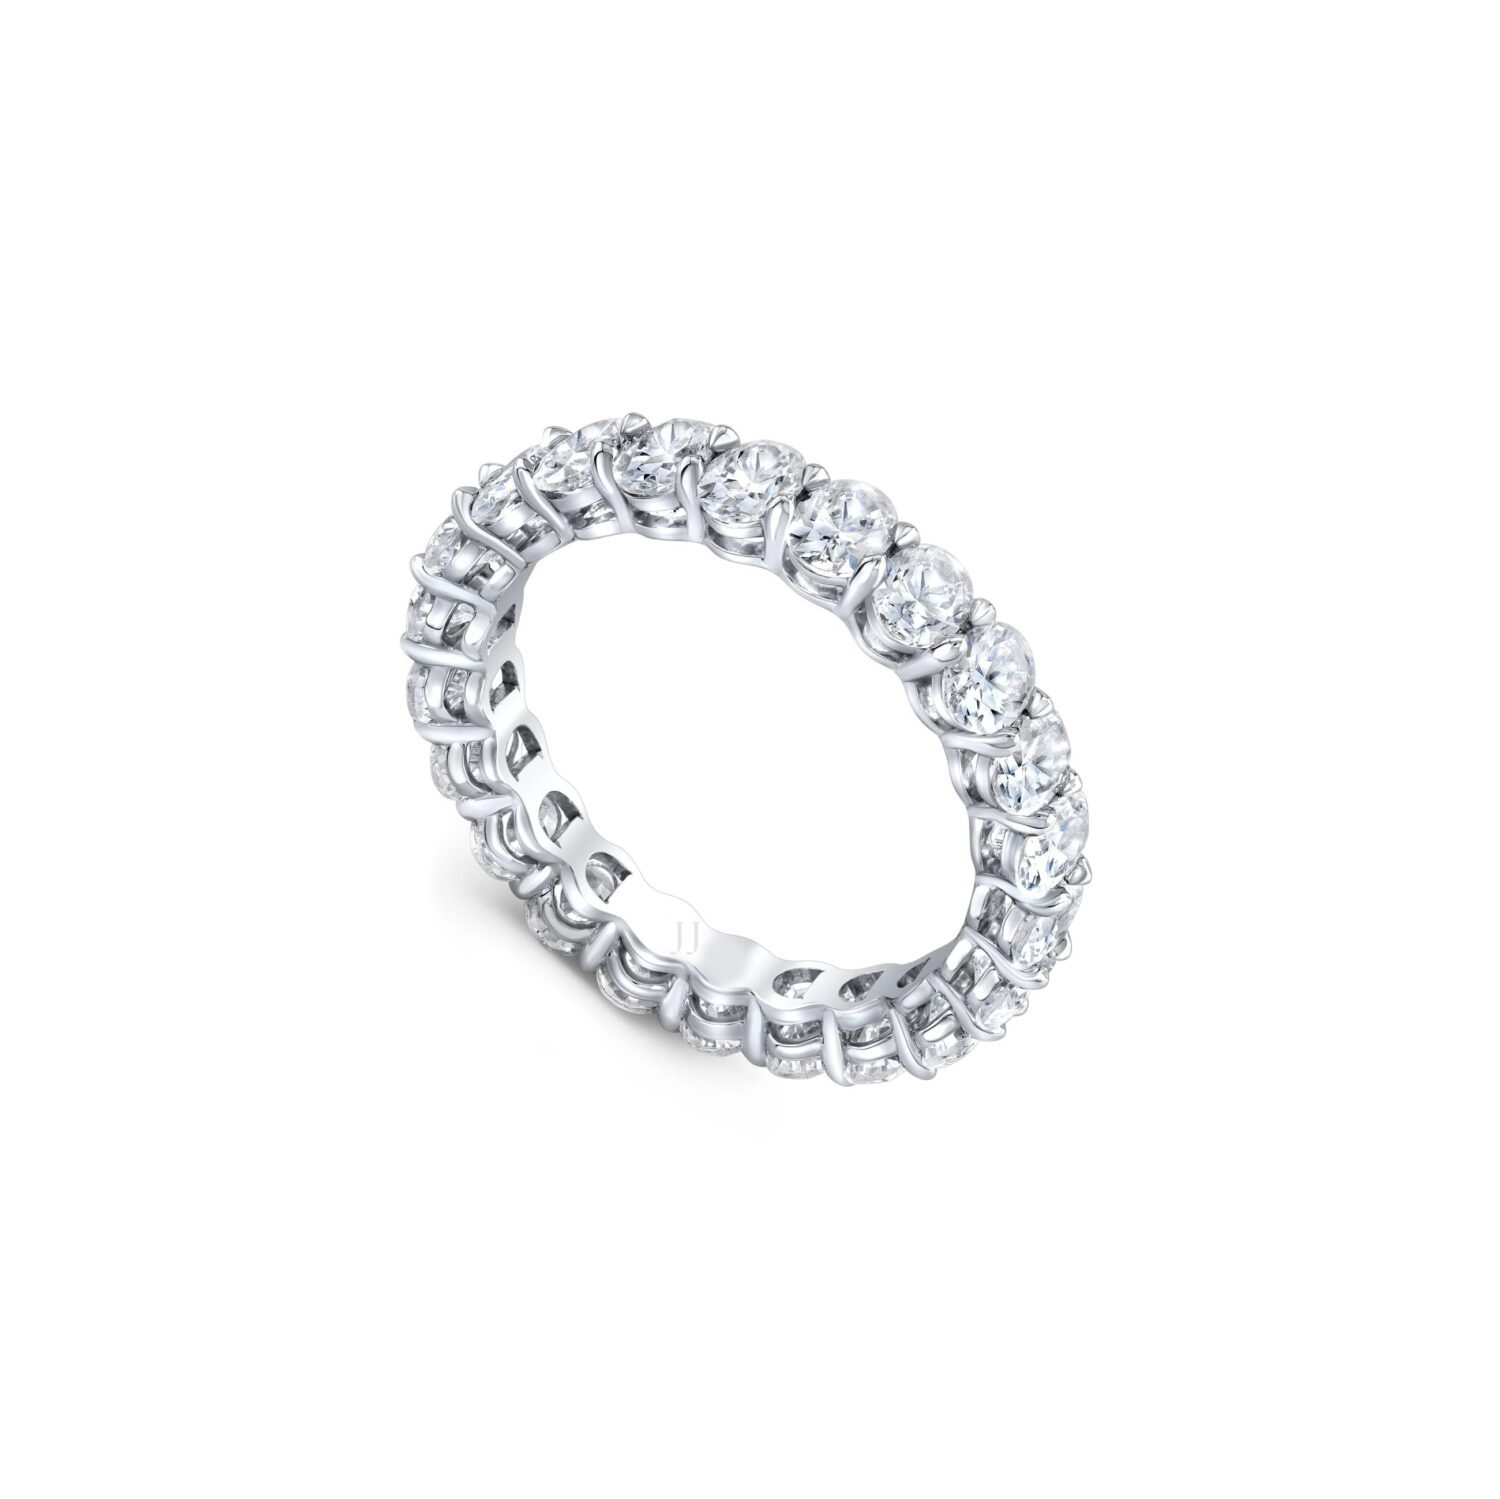 Lab grown diamonds in Cyprus - The Royal Oval Cut 2.11 ct to 12 ct Full Eternity Band Diamond Ring best quality and price